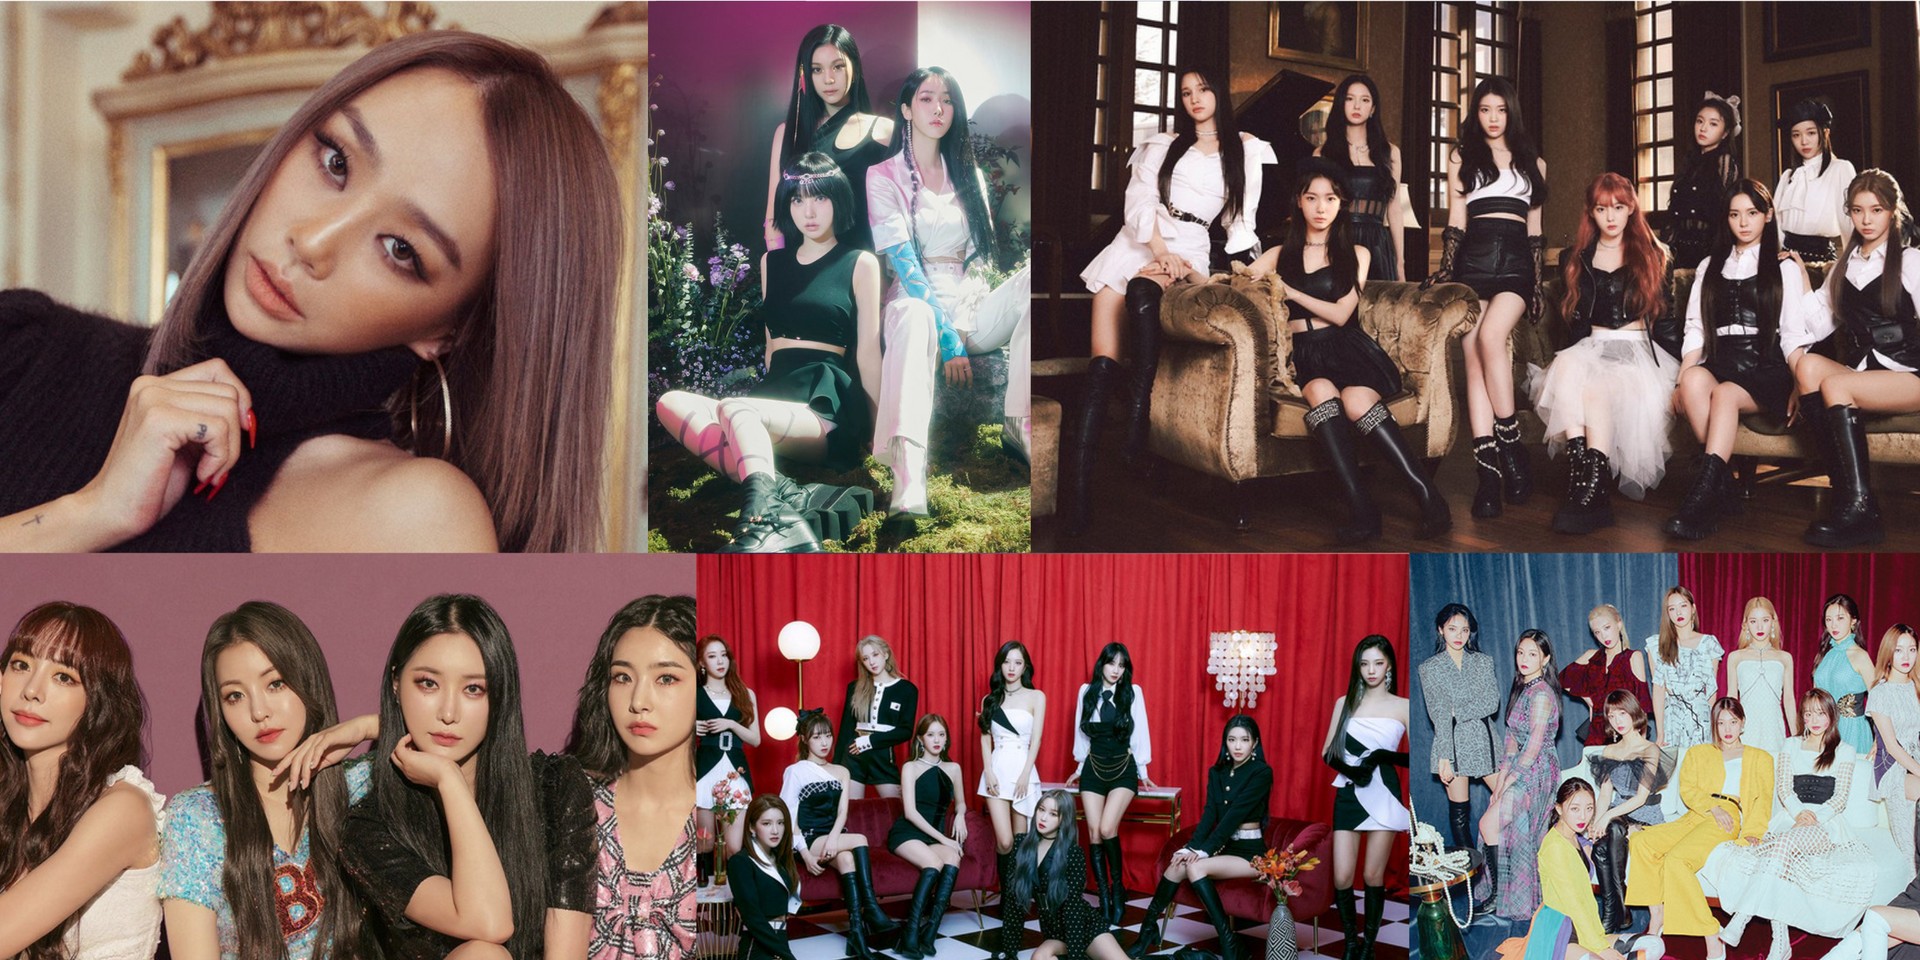 Queendom to return with a second season featuring Brave Girls, Loona, WJSN, Viviz, Kep1er, and Hyolyn